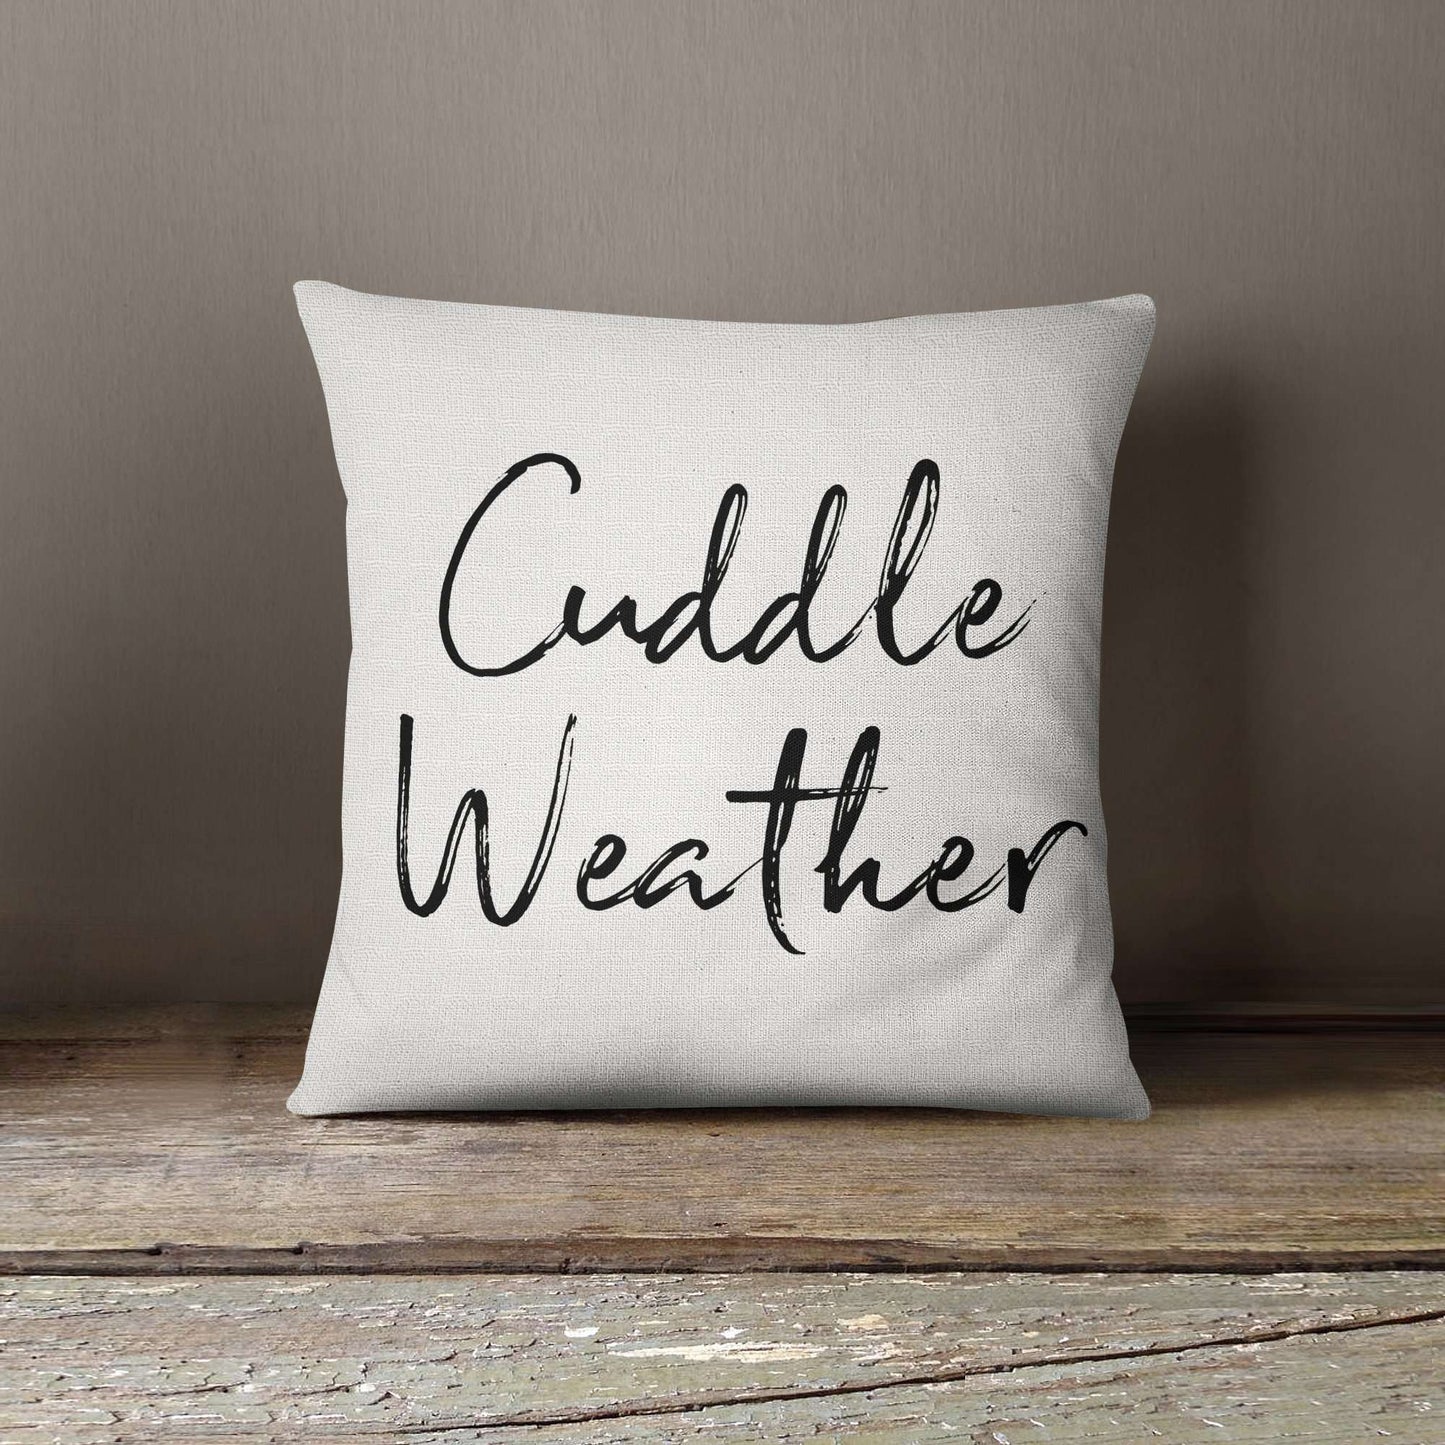 Printed white throw pillow with the script writing 'cuddle weather' on it.